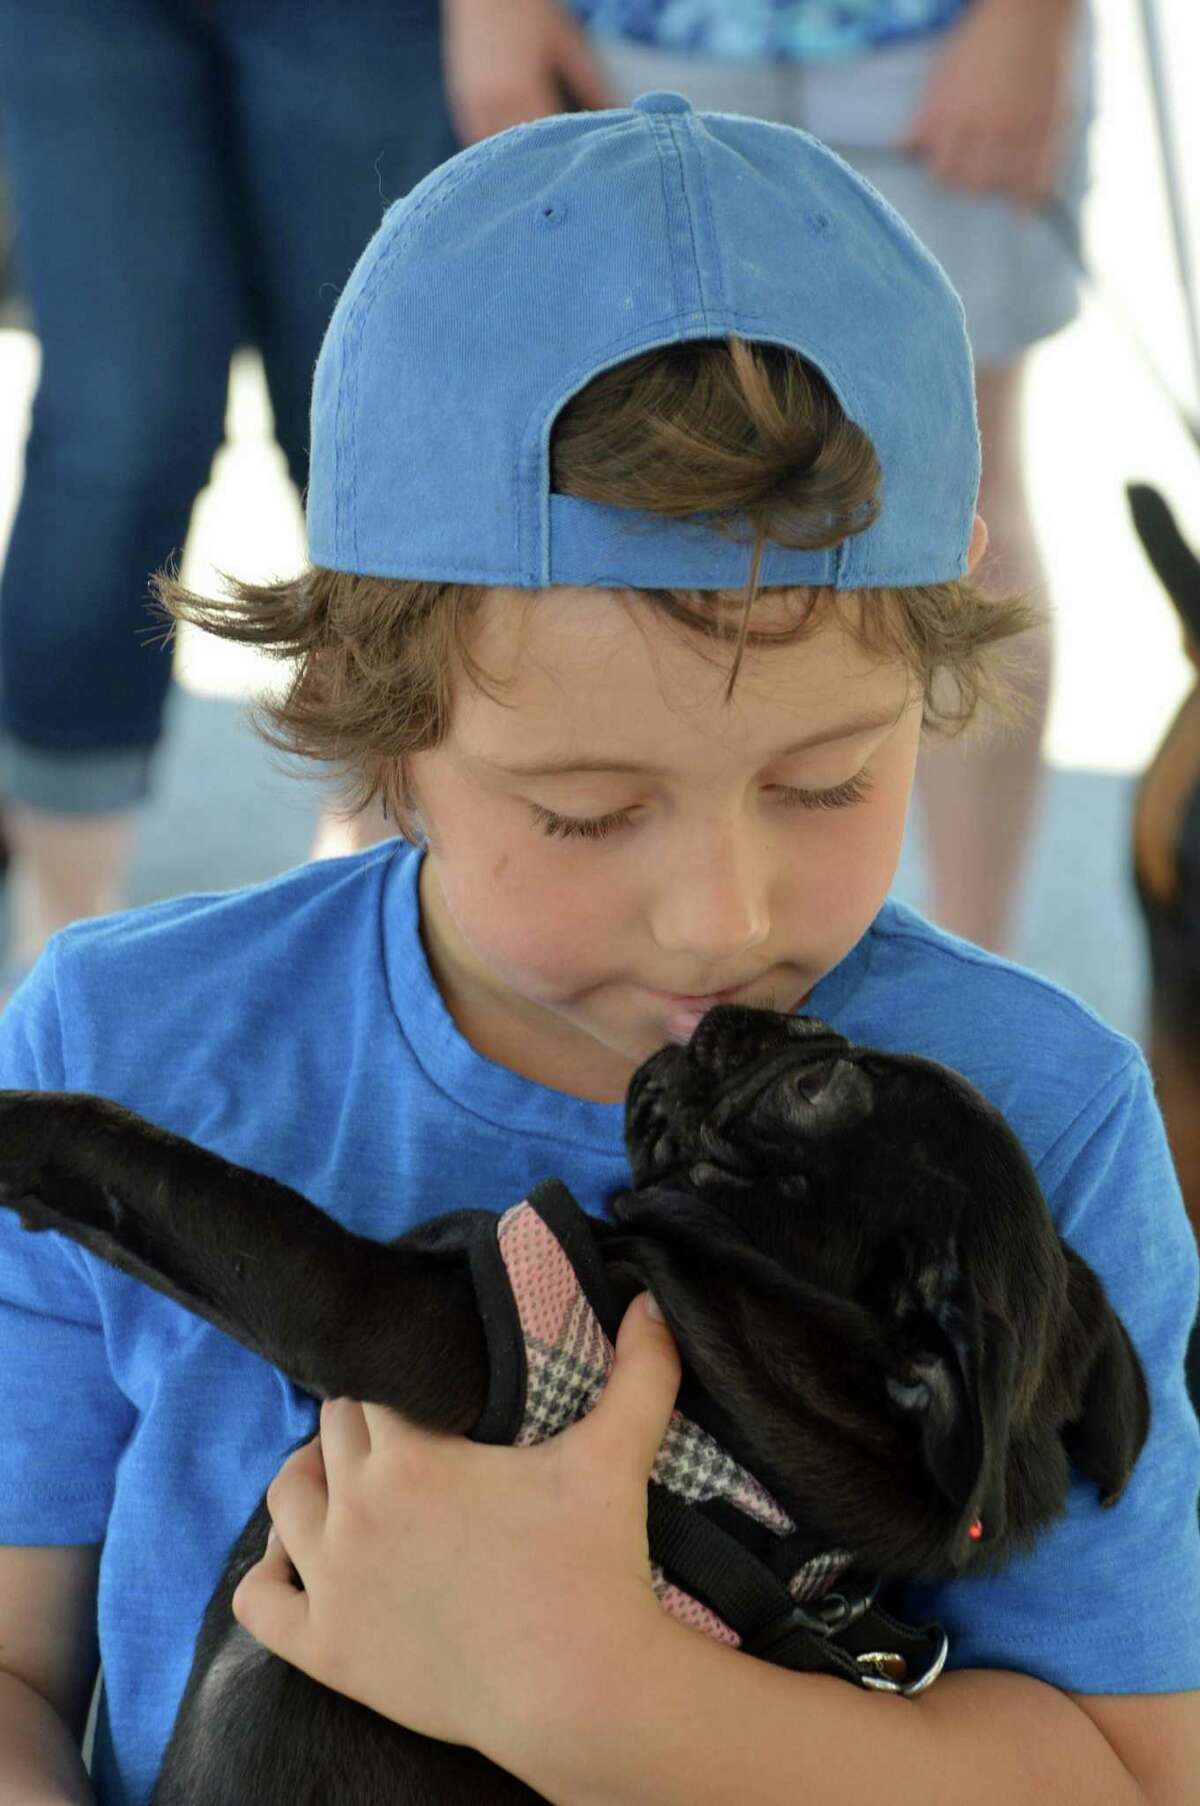 Santino Crudle, 6, of New Canaan, competes in a kissing contest with his dog, Pepa, at the the fifth annual Dog Days festival in downtown New Canaan Sunday, June 8. Jarret Liotta / For the New Canaan News